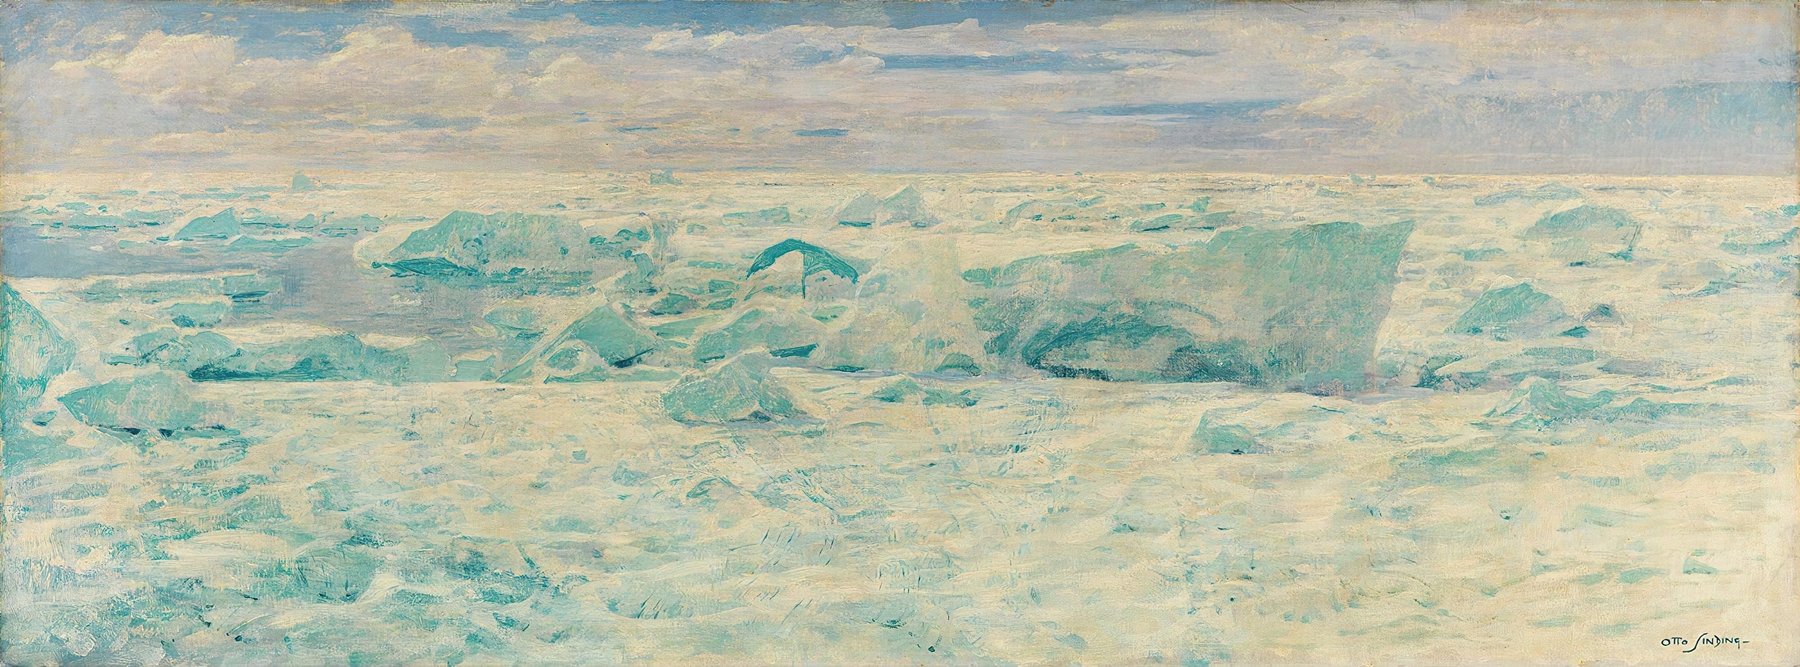 Ice Floes in the Arctic Ocean (1895)